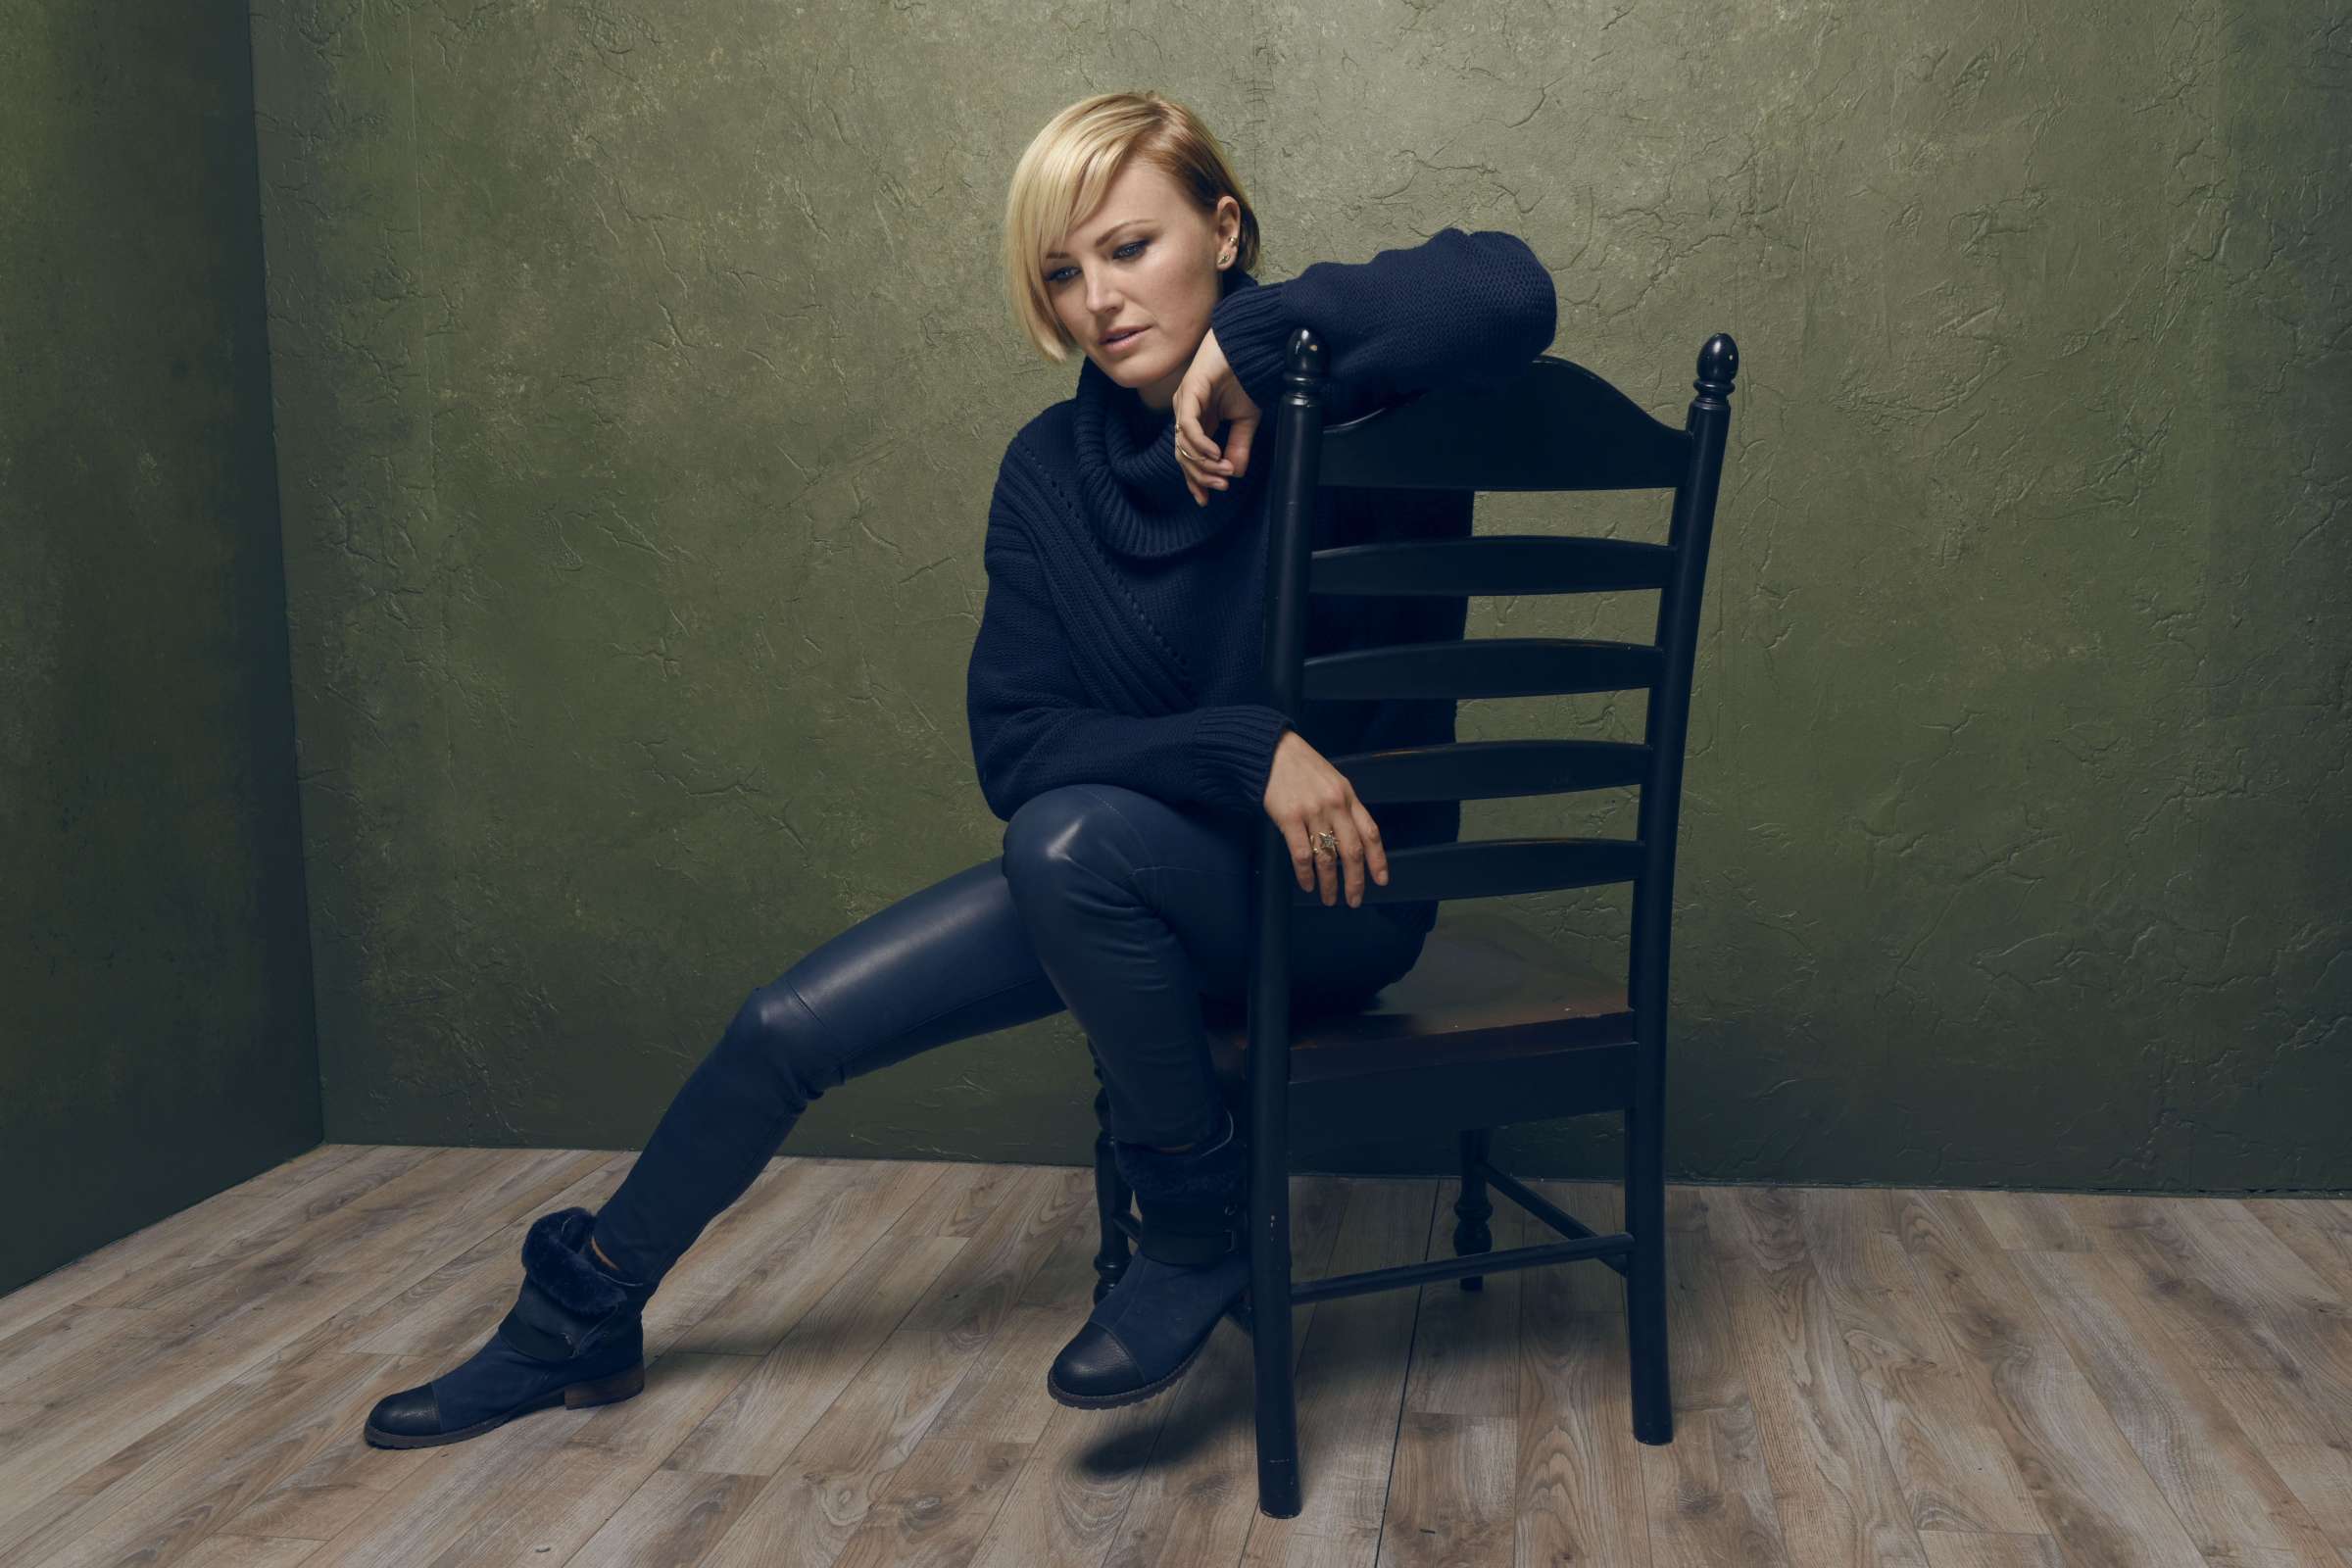 Malin Akerman poses for a portrait at the Village at the Lift Present